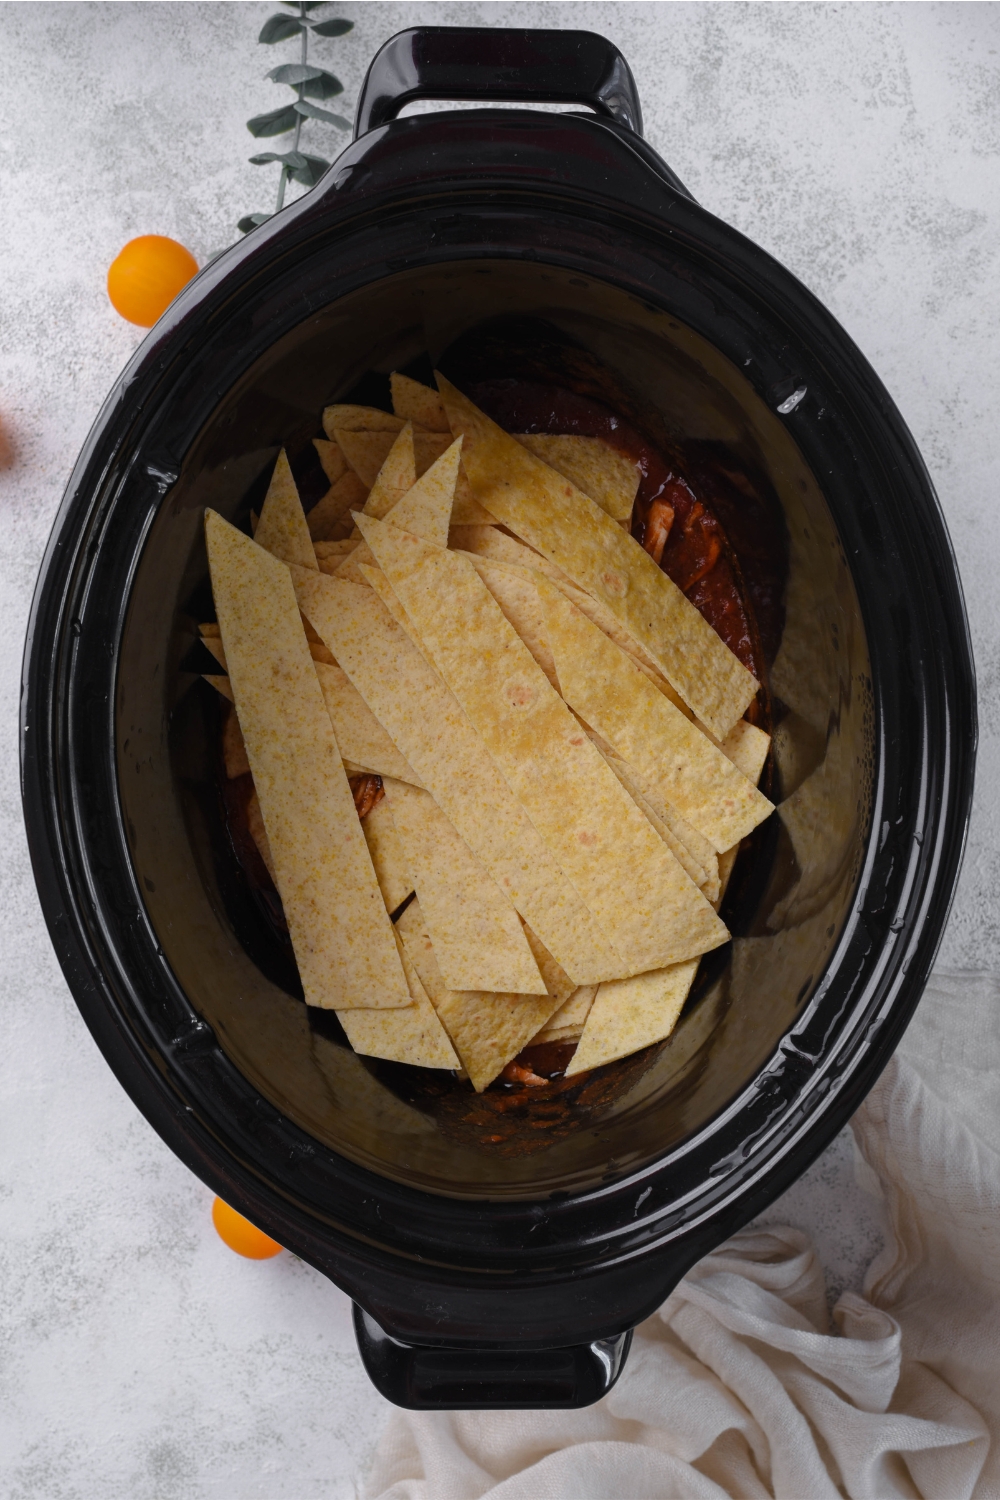 A crockpot with corn tortillas added to the enchilada shredded chicken.